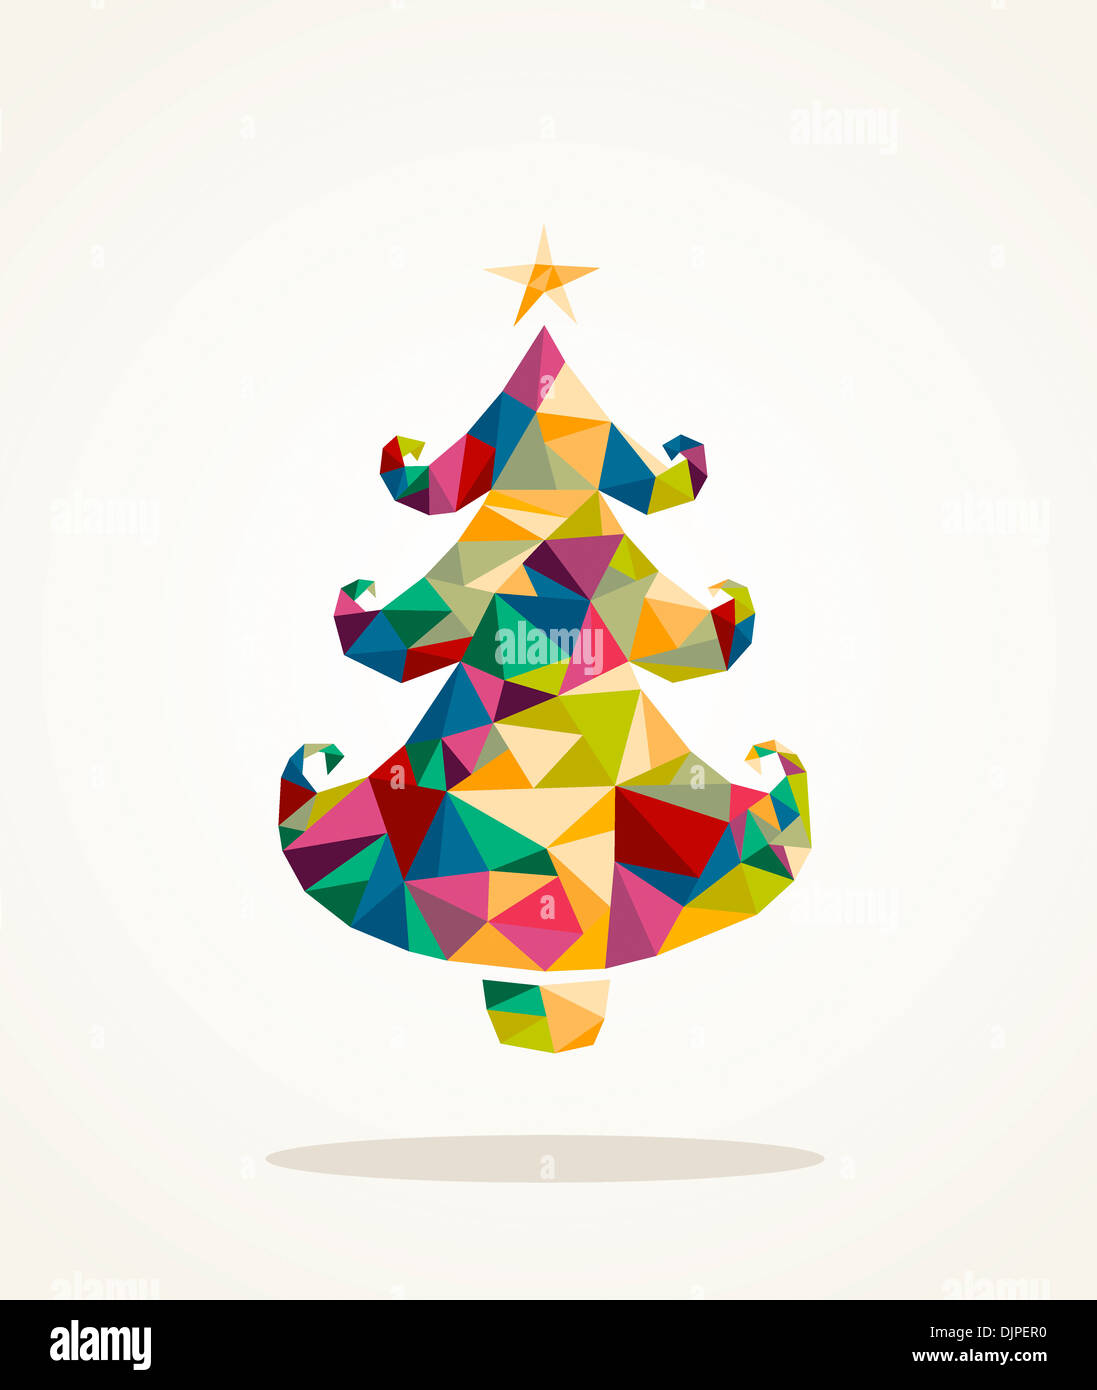 Isolated colorful abstract Christmas pine tree triangle composition. EPS10 vector file organized in layers for easy editing. Stock Photo